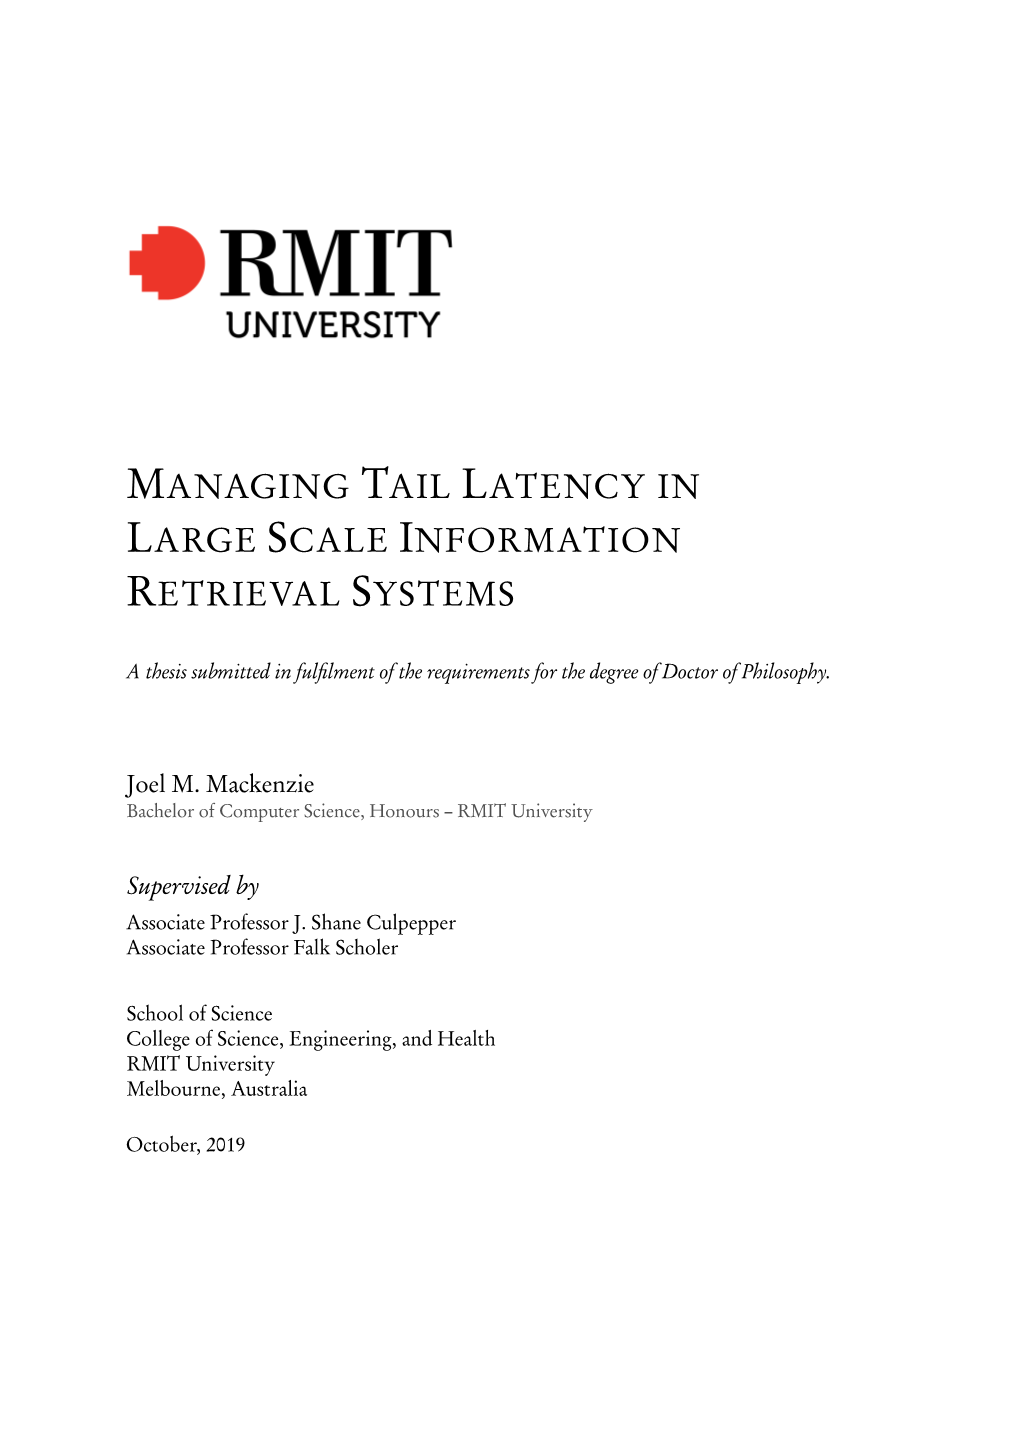 Managing Tail Latency in Large Scale Information Retrieval Systems